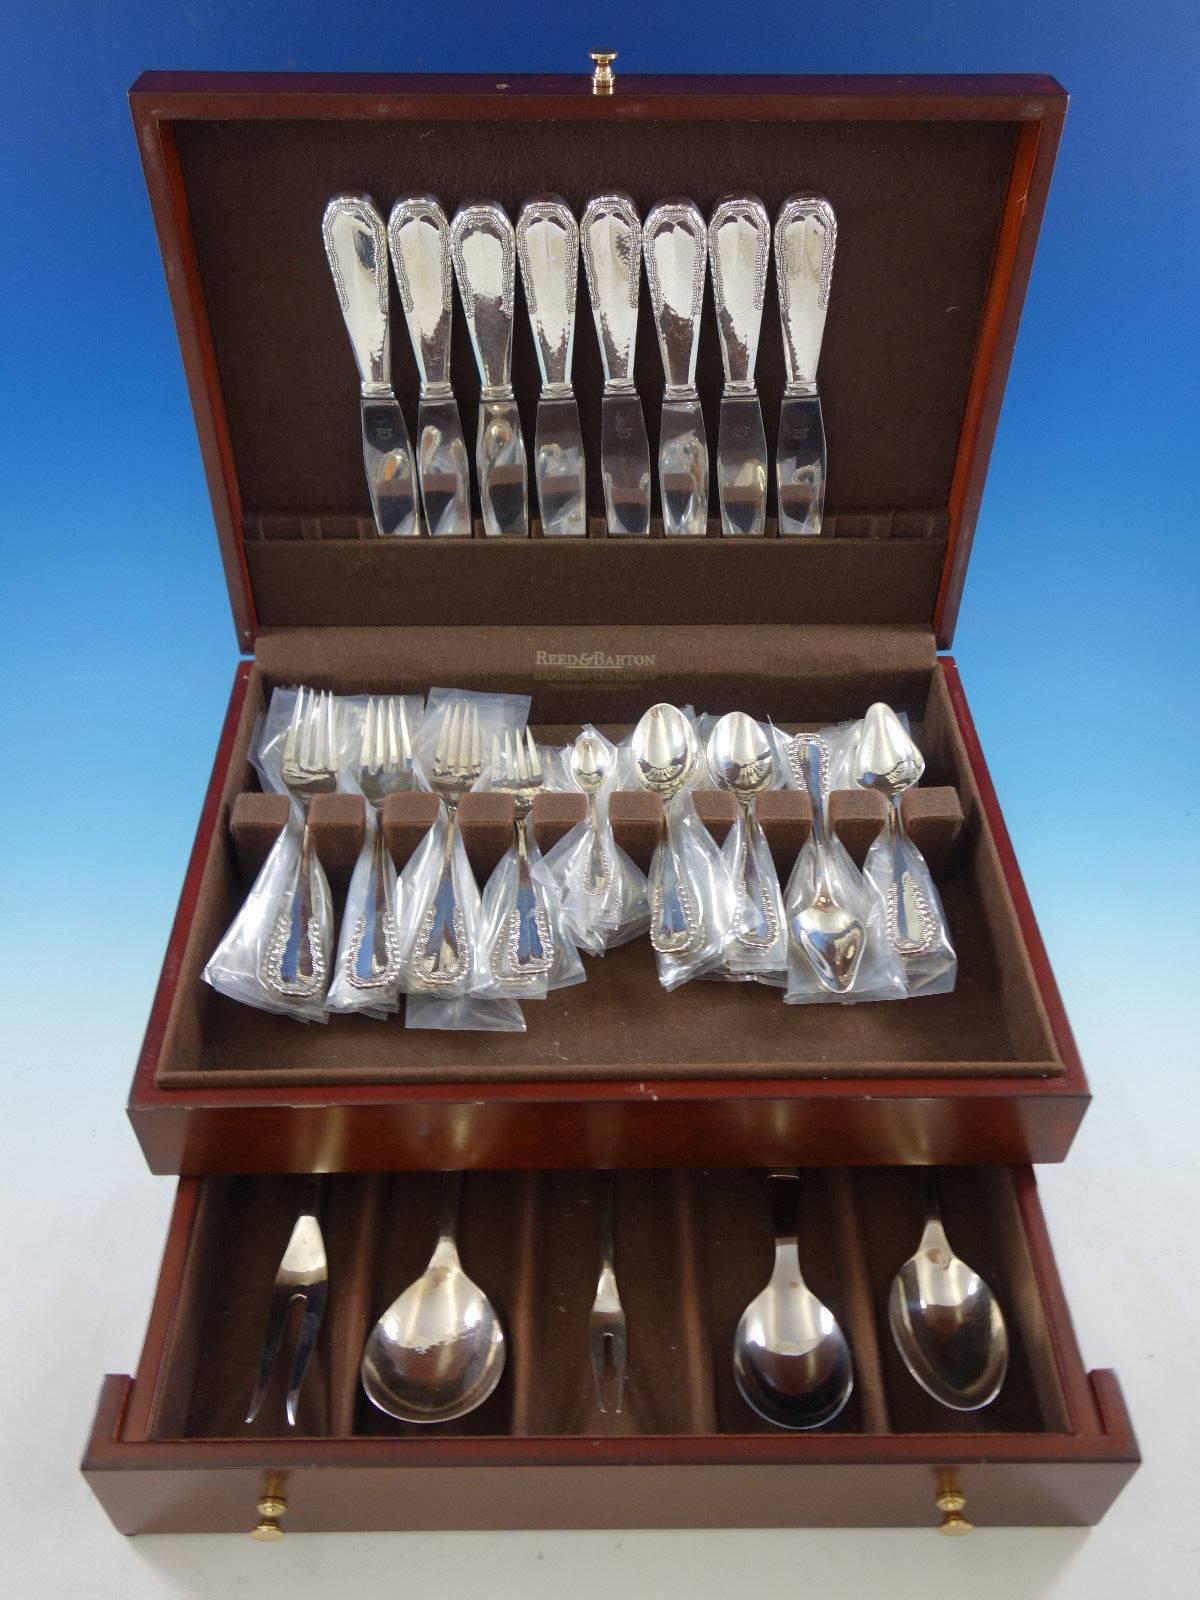 Exquisite Viking aka Nordisk by Georg Jensen, circa 1927, sterling silver flatware set, 53 pieces. The pattern features a beaded design and beautiful subtle hand hammering. This set includes: Eight dinner size knives, 9